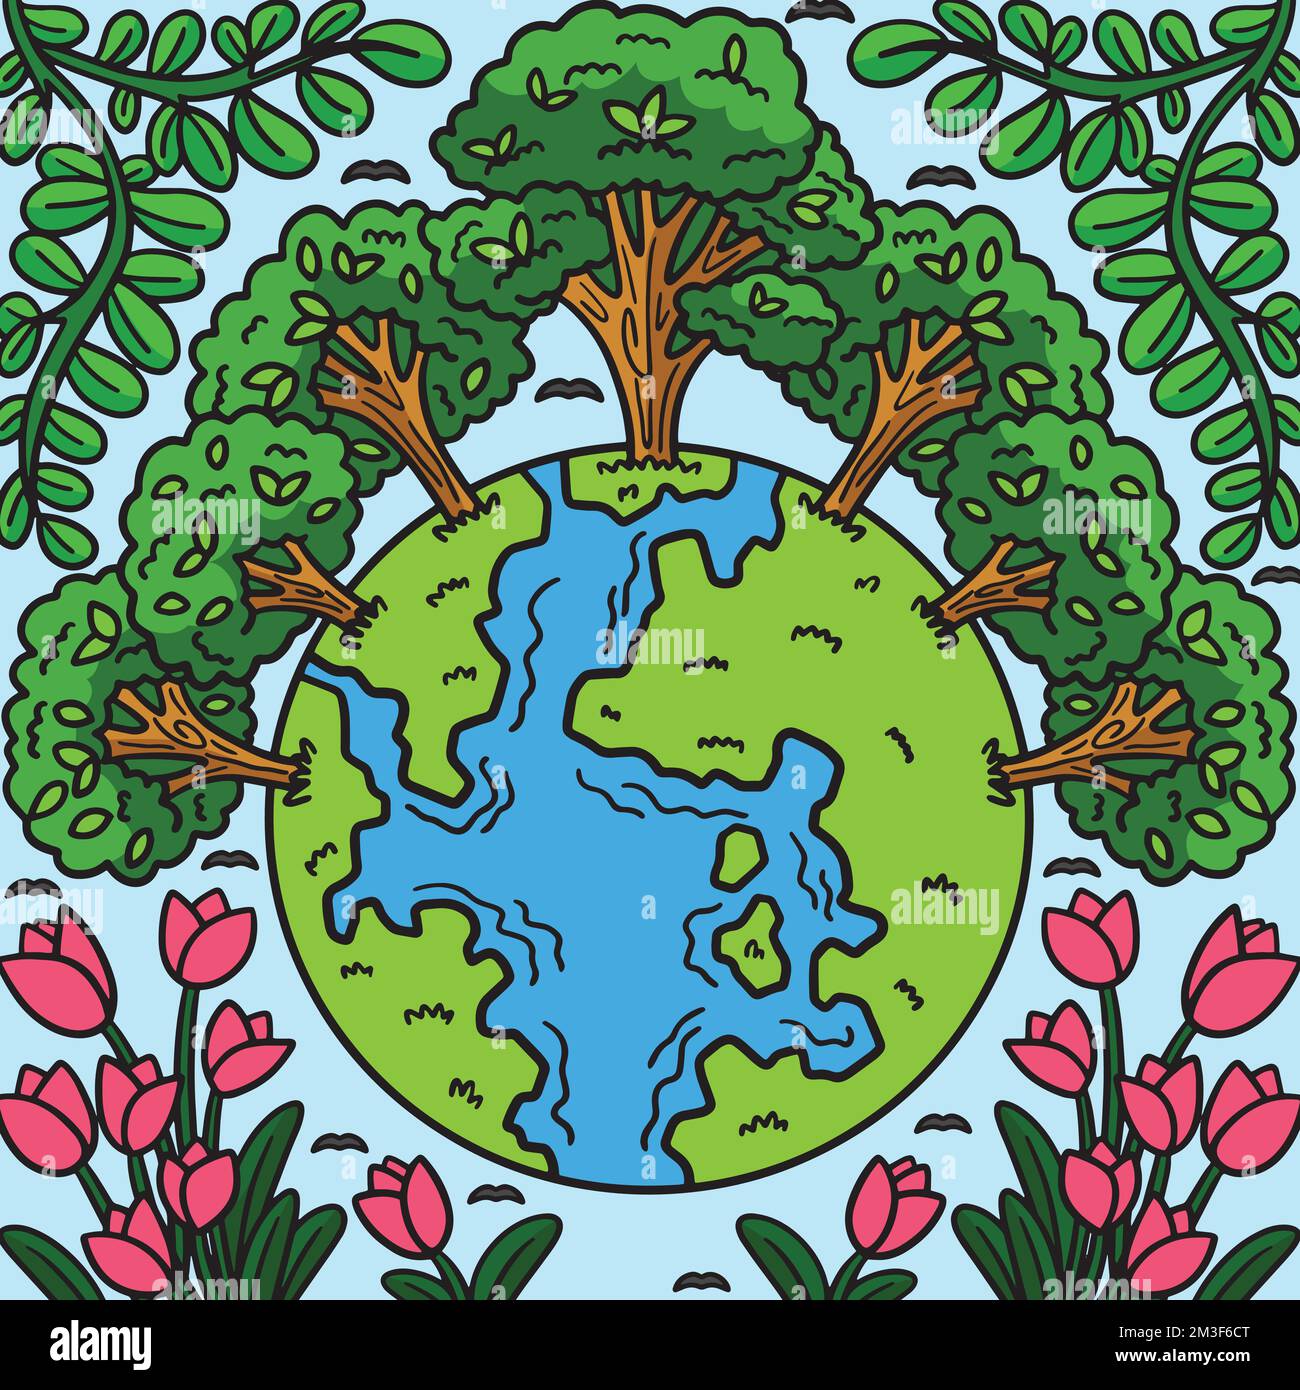 Earth Day Trees Crowning Earth Colored Cartoon Stock Vector